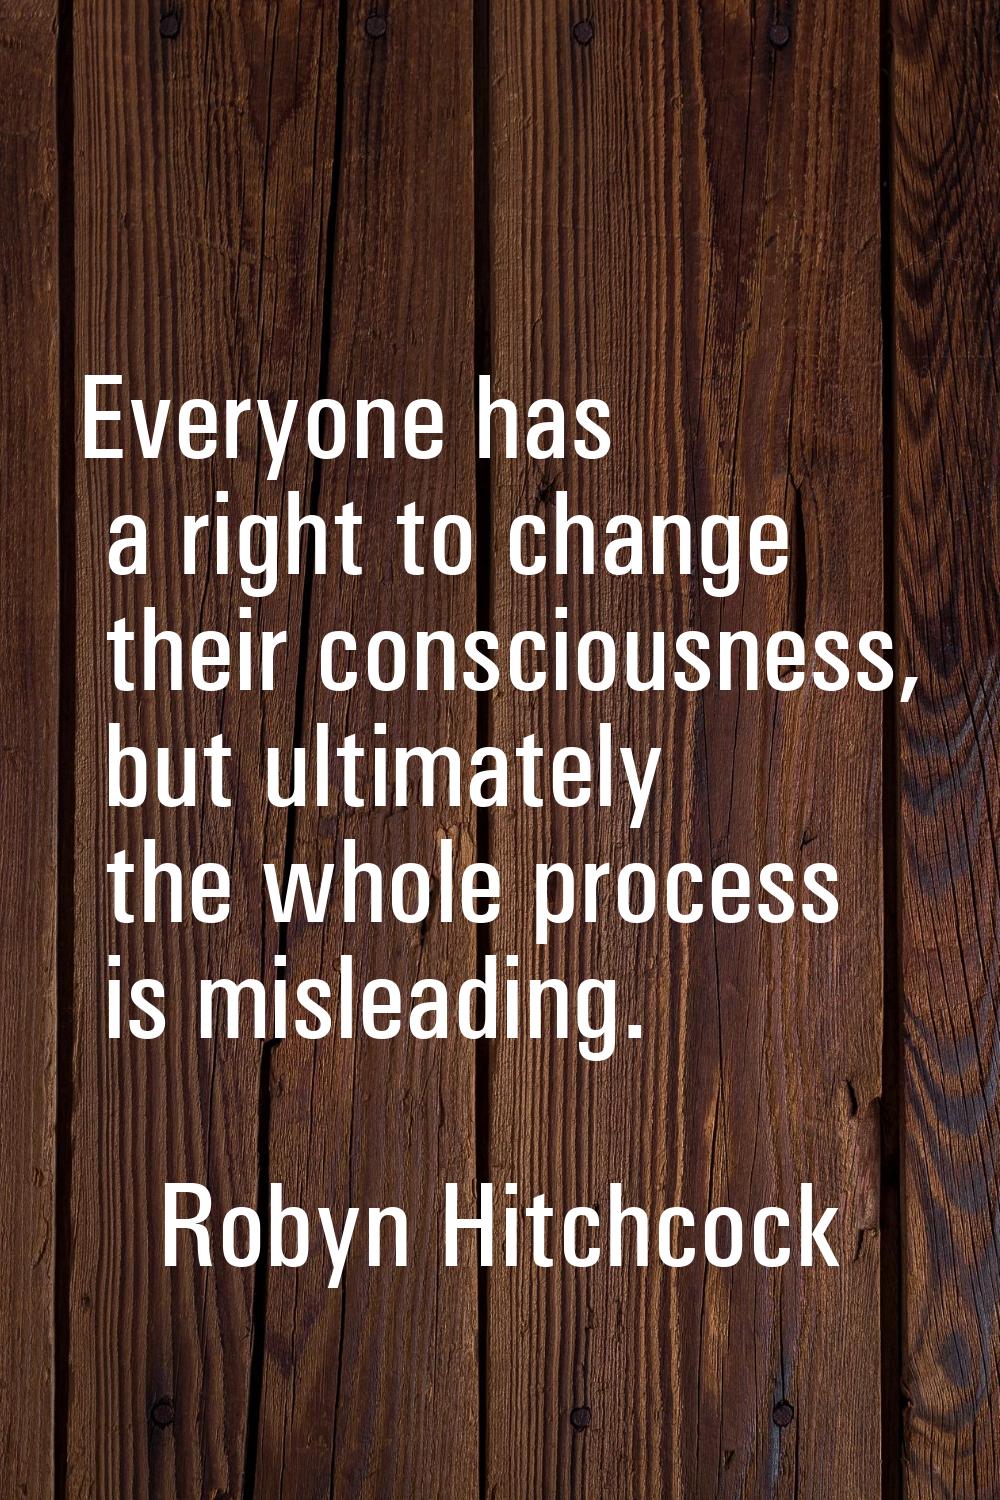 Everyone has a right to change their consciousness, but ultimately the whole process is misleading.